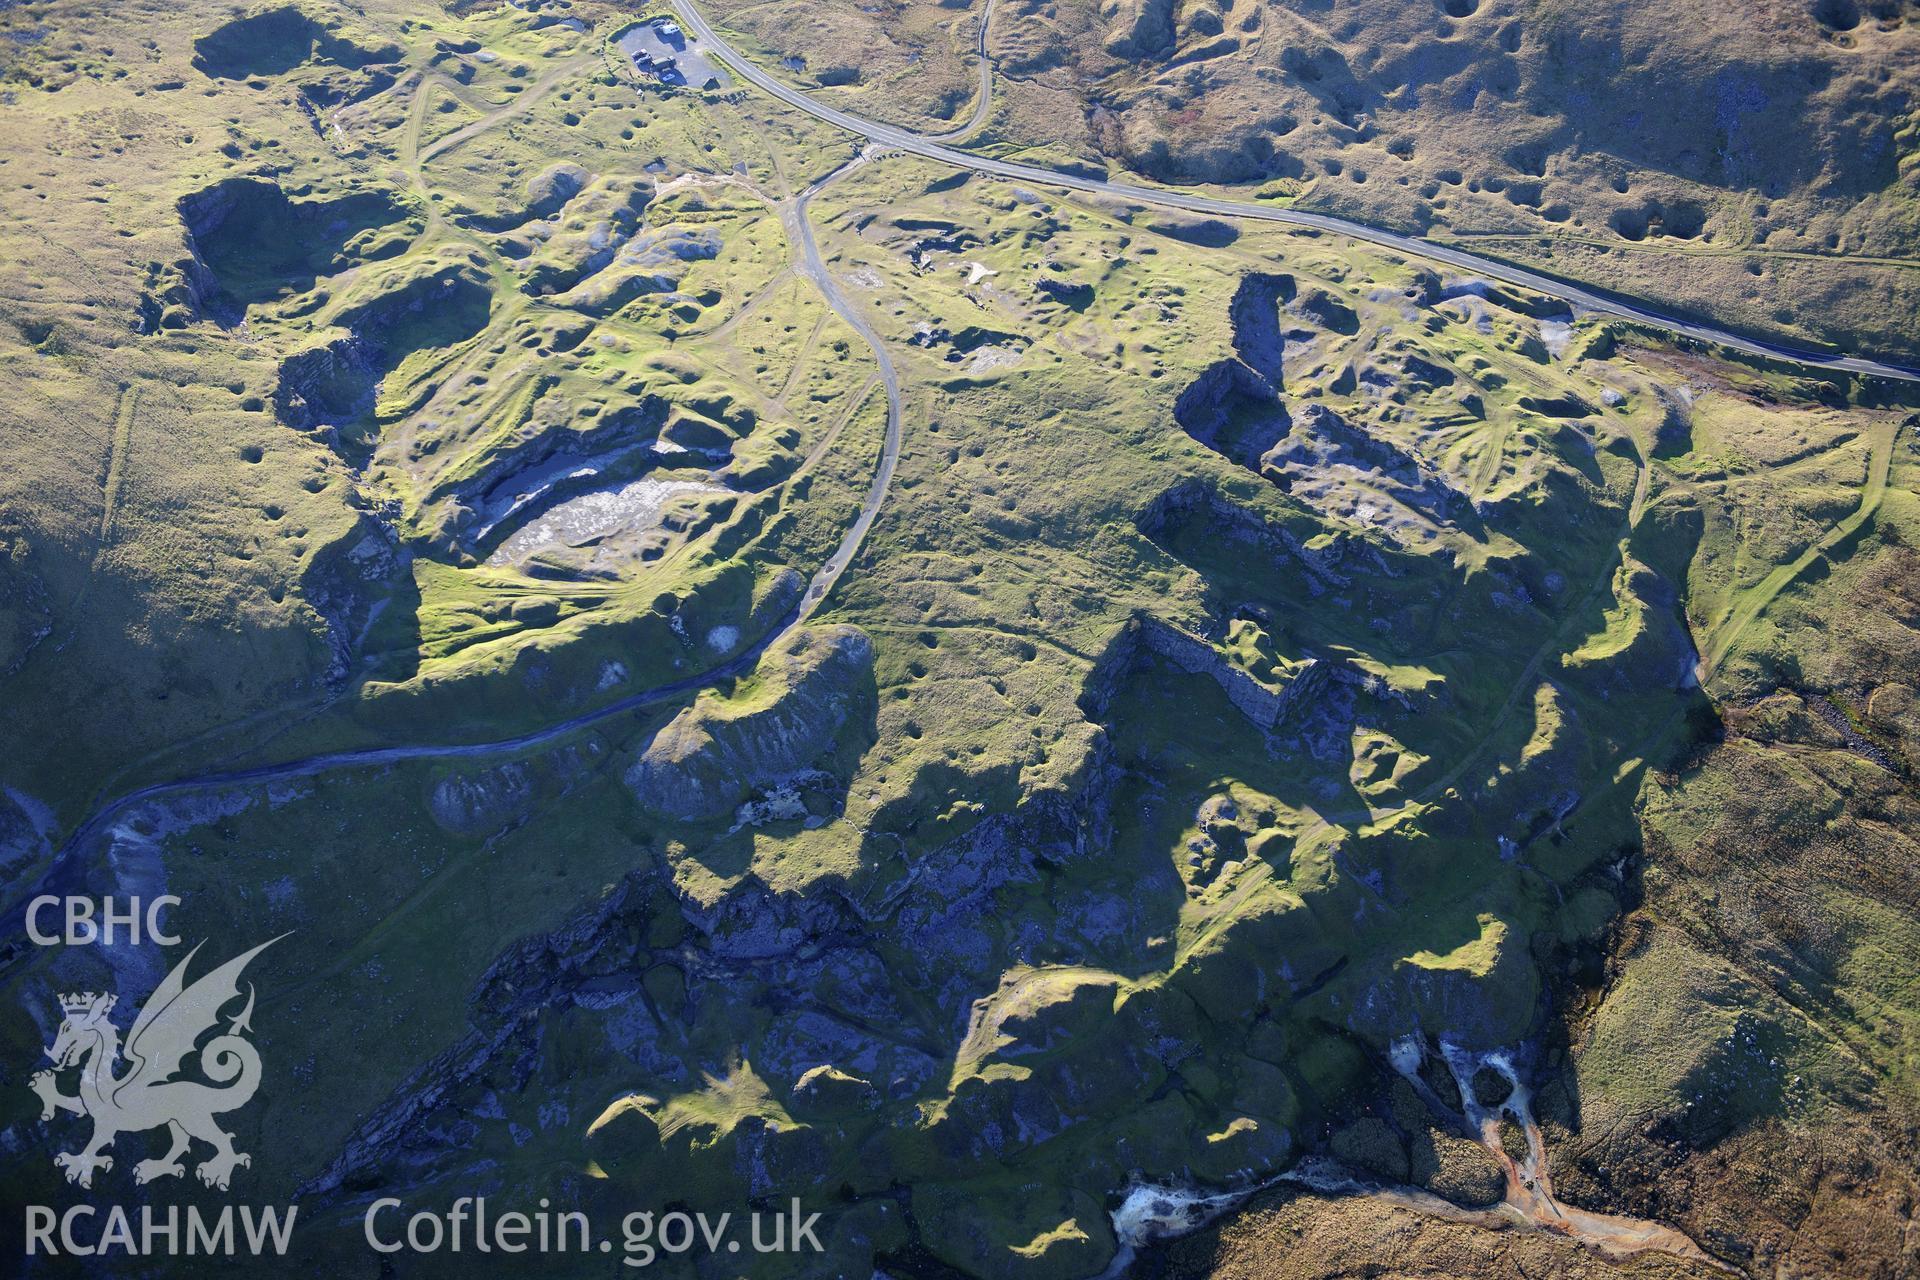 RCAHMW colour oblique photograph of Foel Fawr quarry complex. Taken by Toby Driver on 28/11/2012.